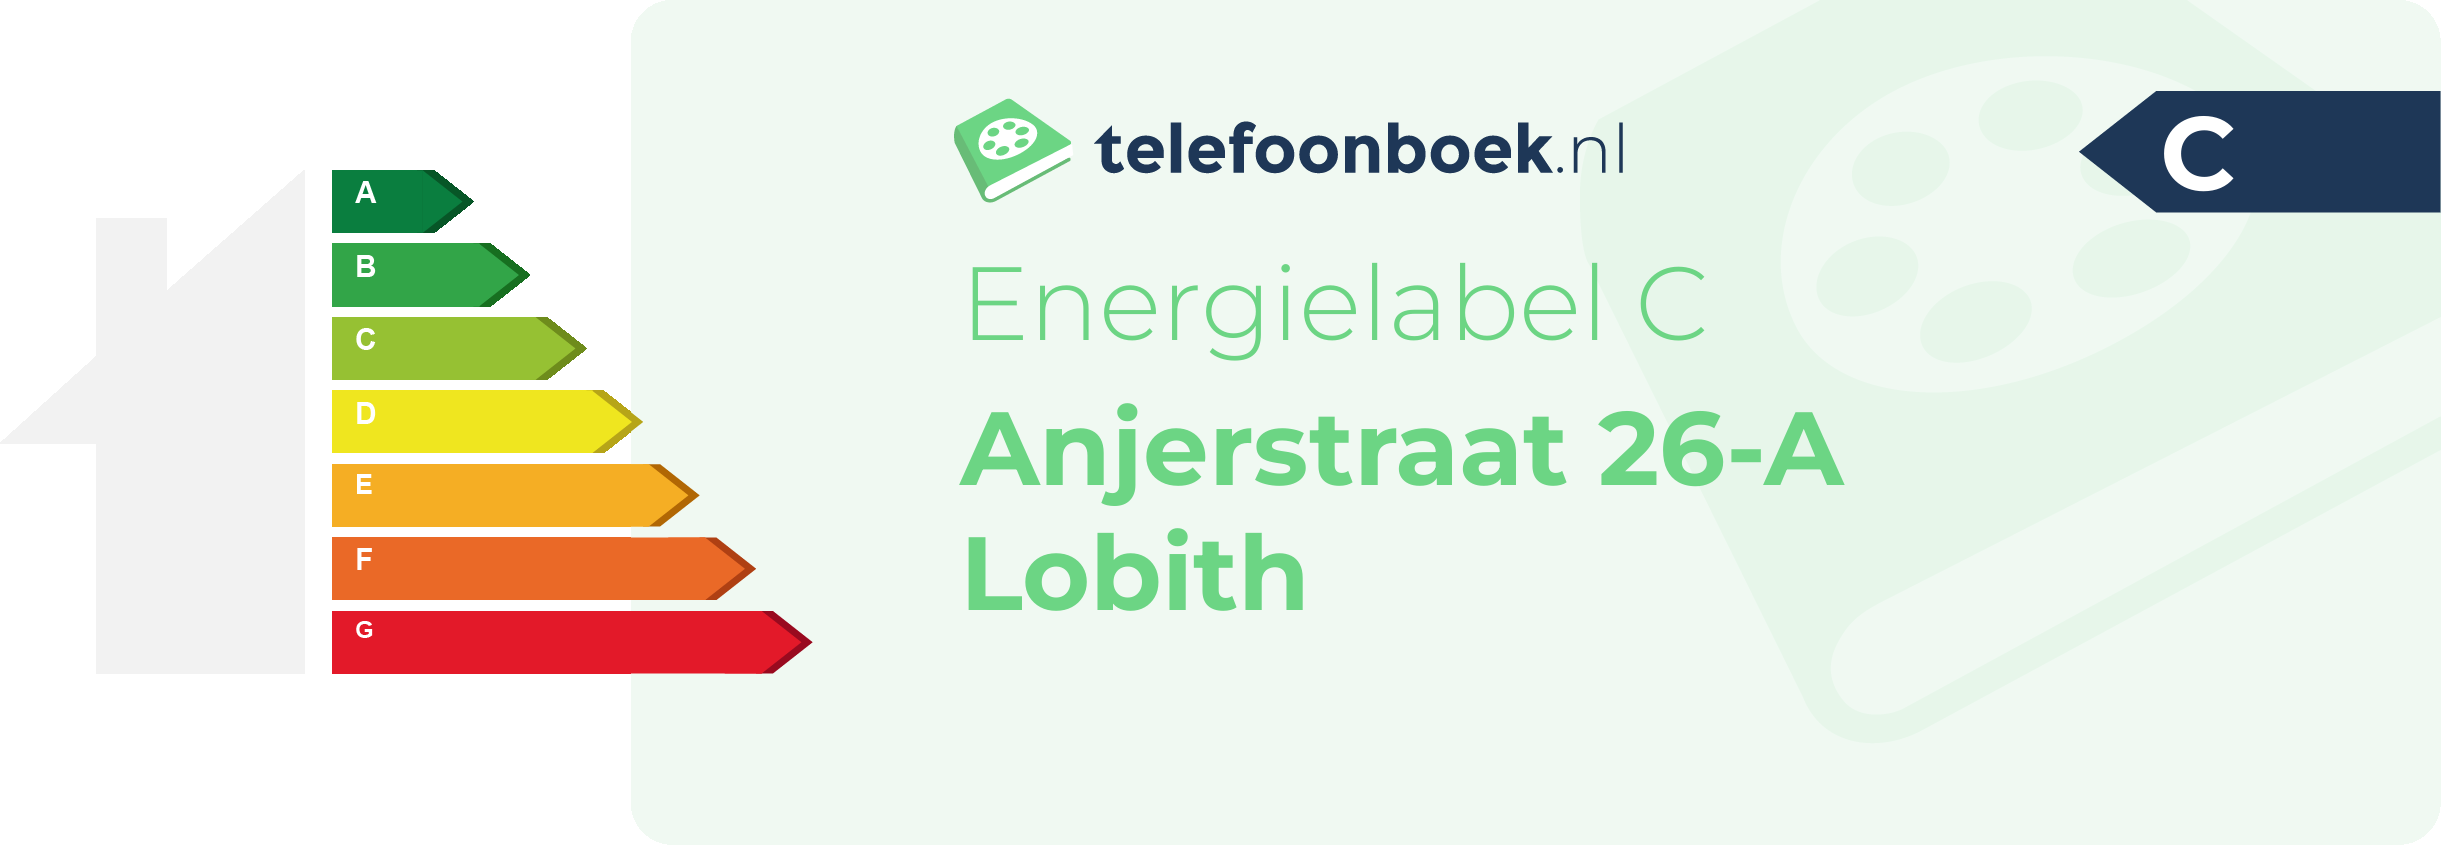 Energielabel Anjerstraat 26-A Lobith